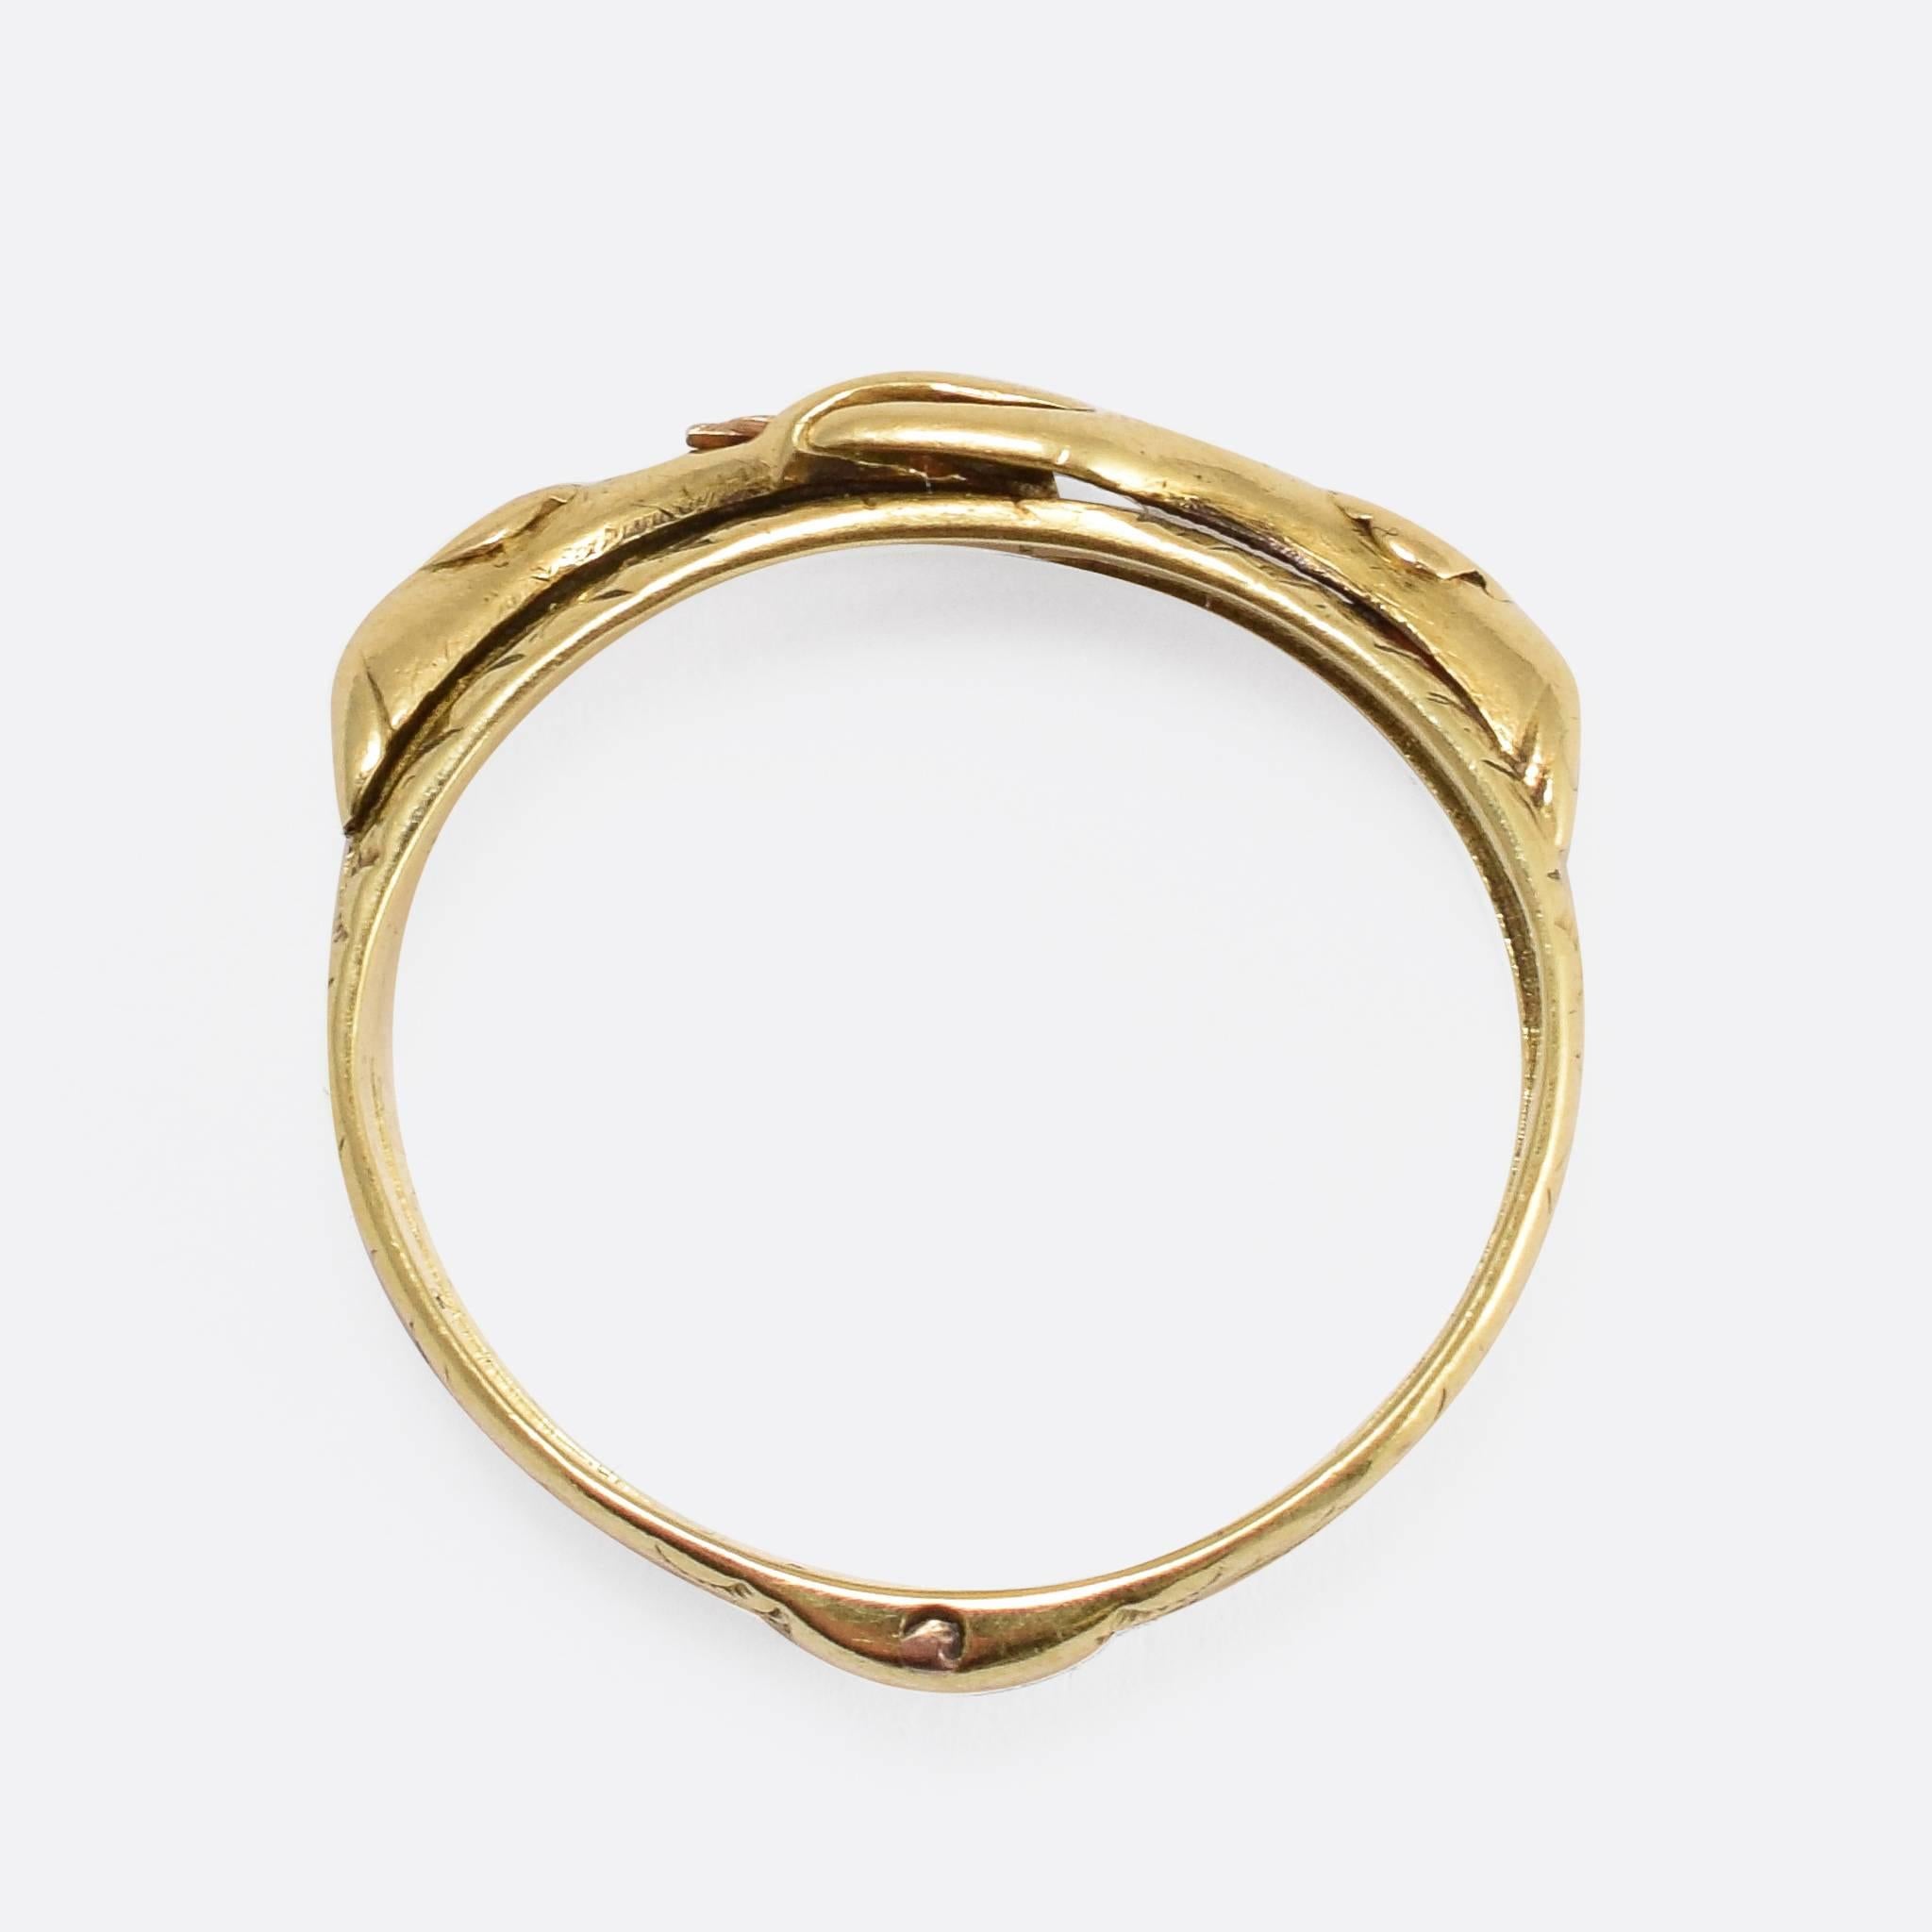 Women's or Men's Early Victorian Gimmel Fede gold Handclasp Ring